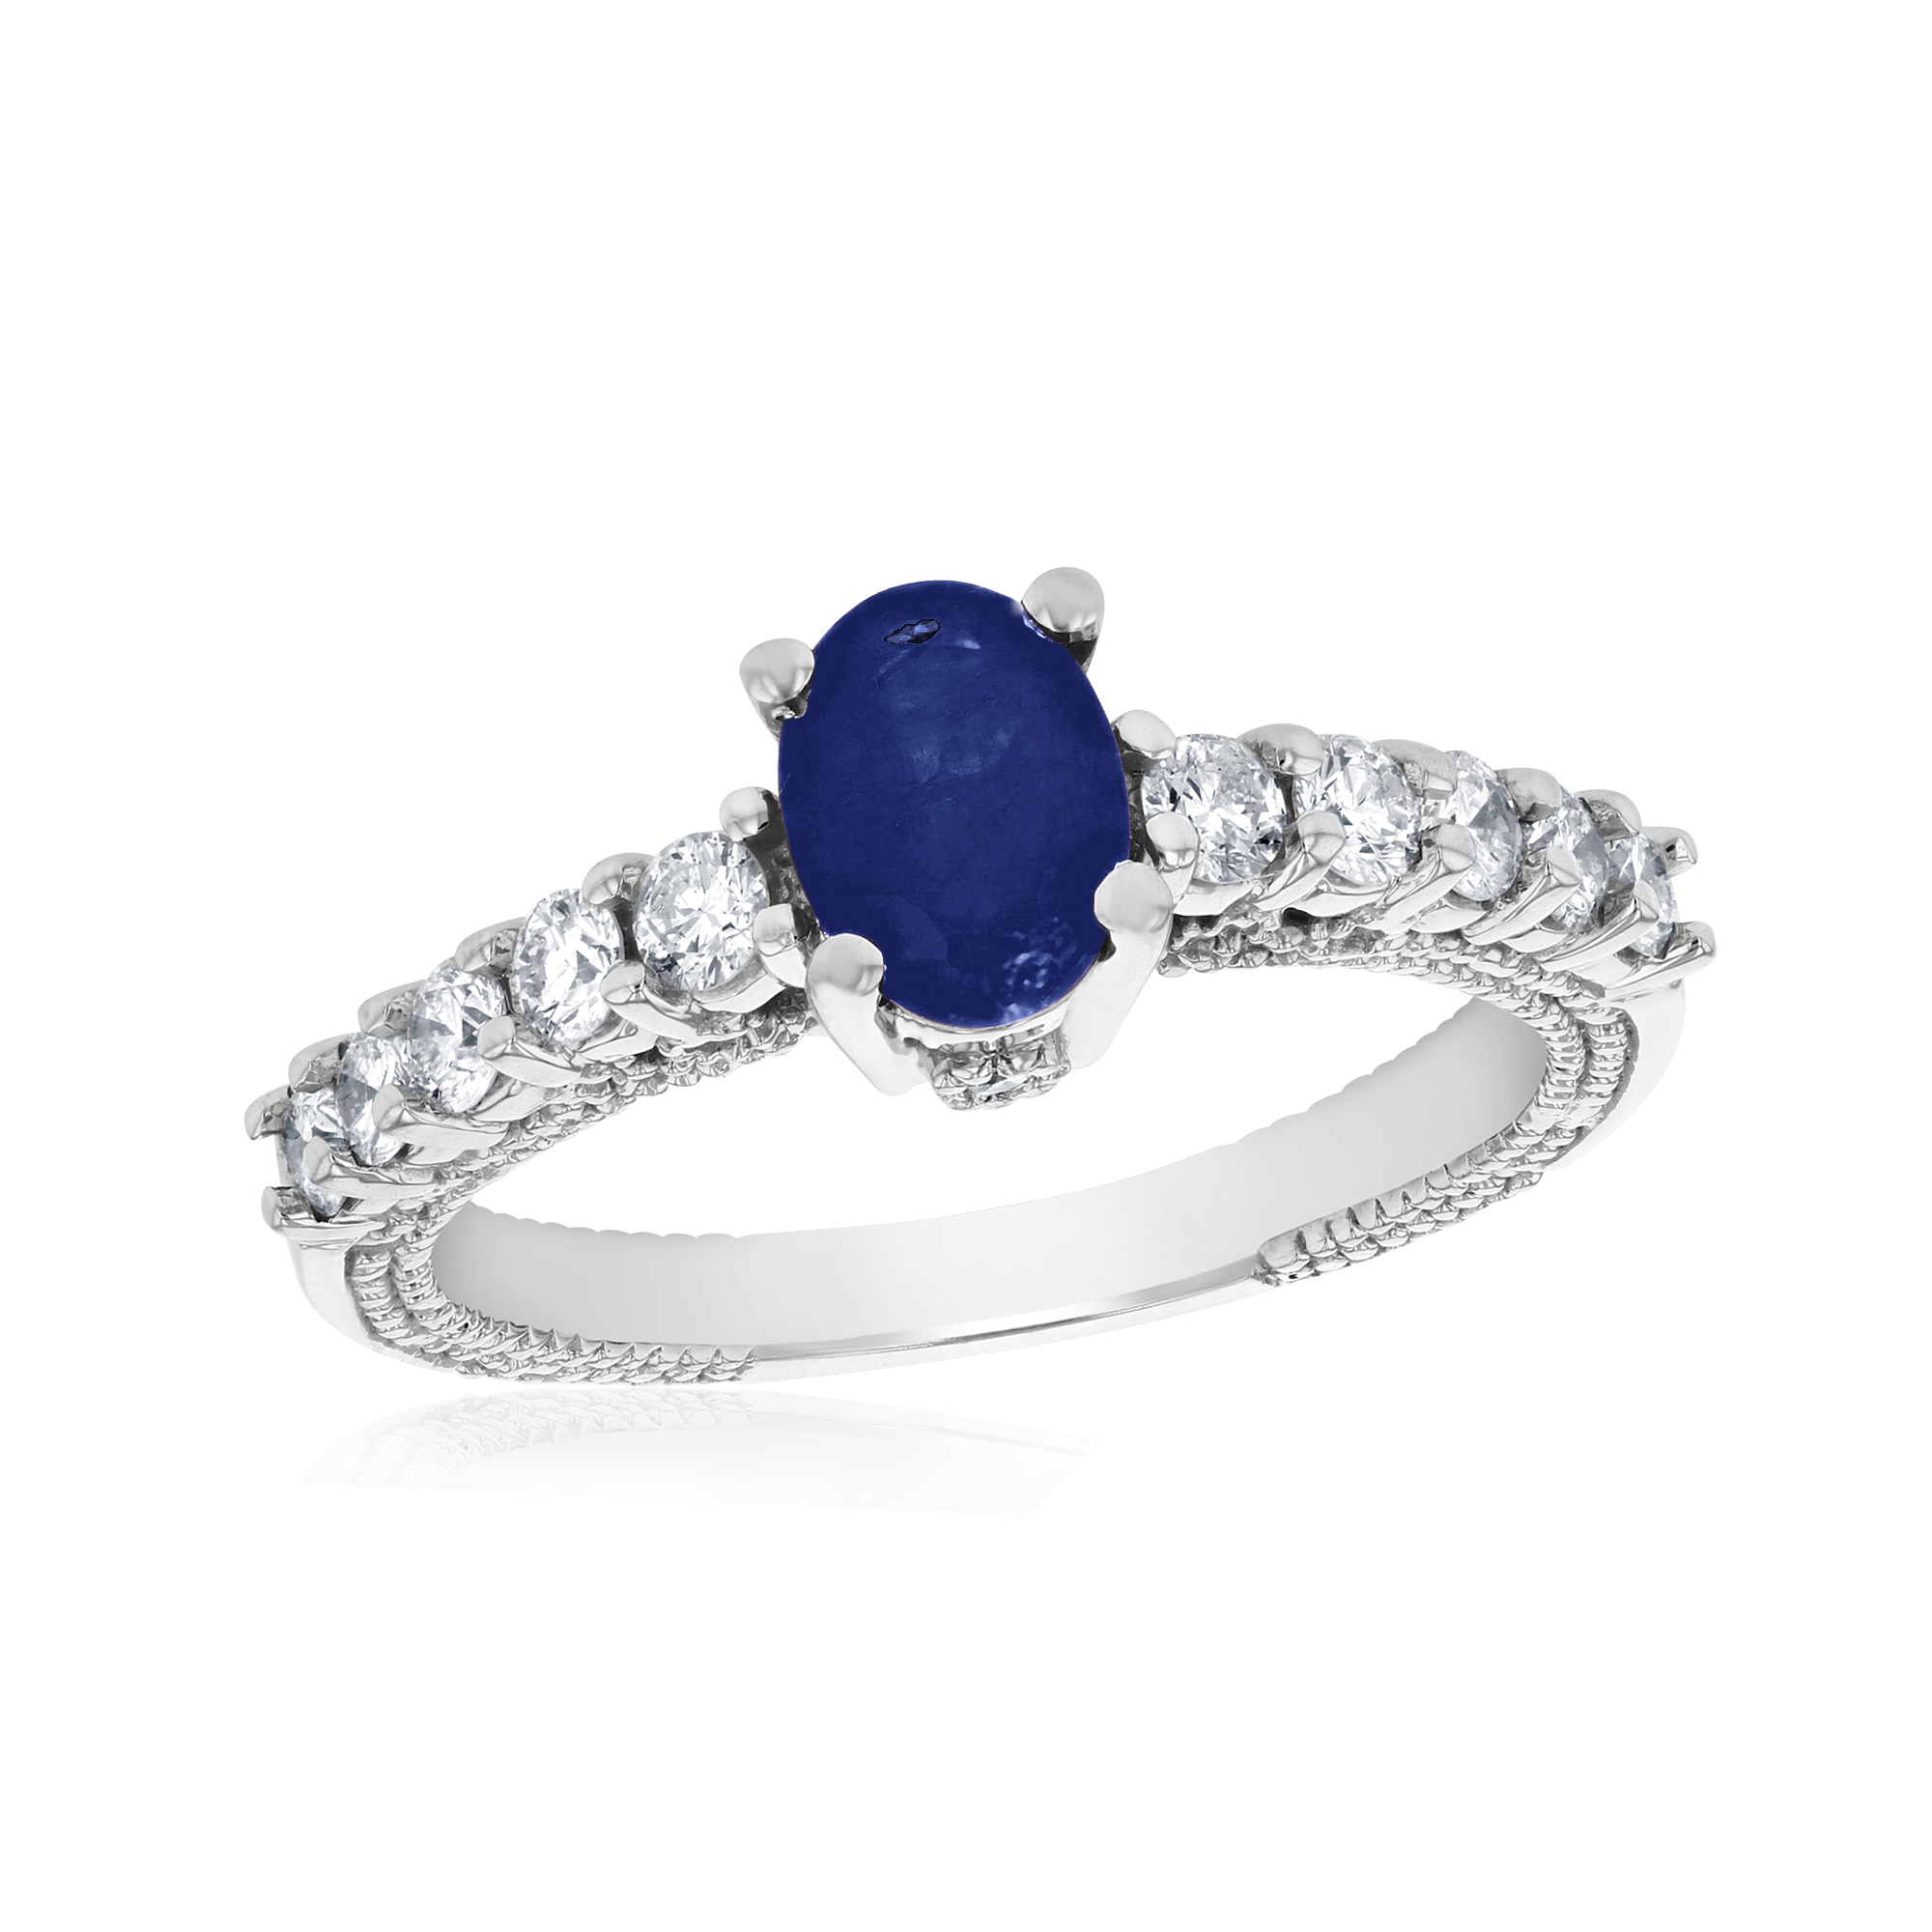 View 0.51ctw Diamond and Sapphire Ring in 14k White Gold